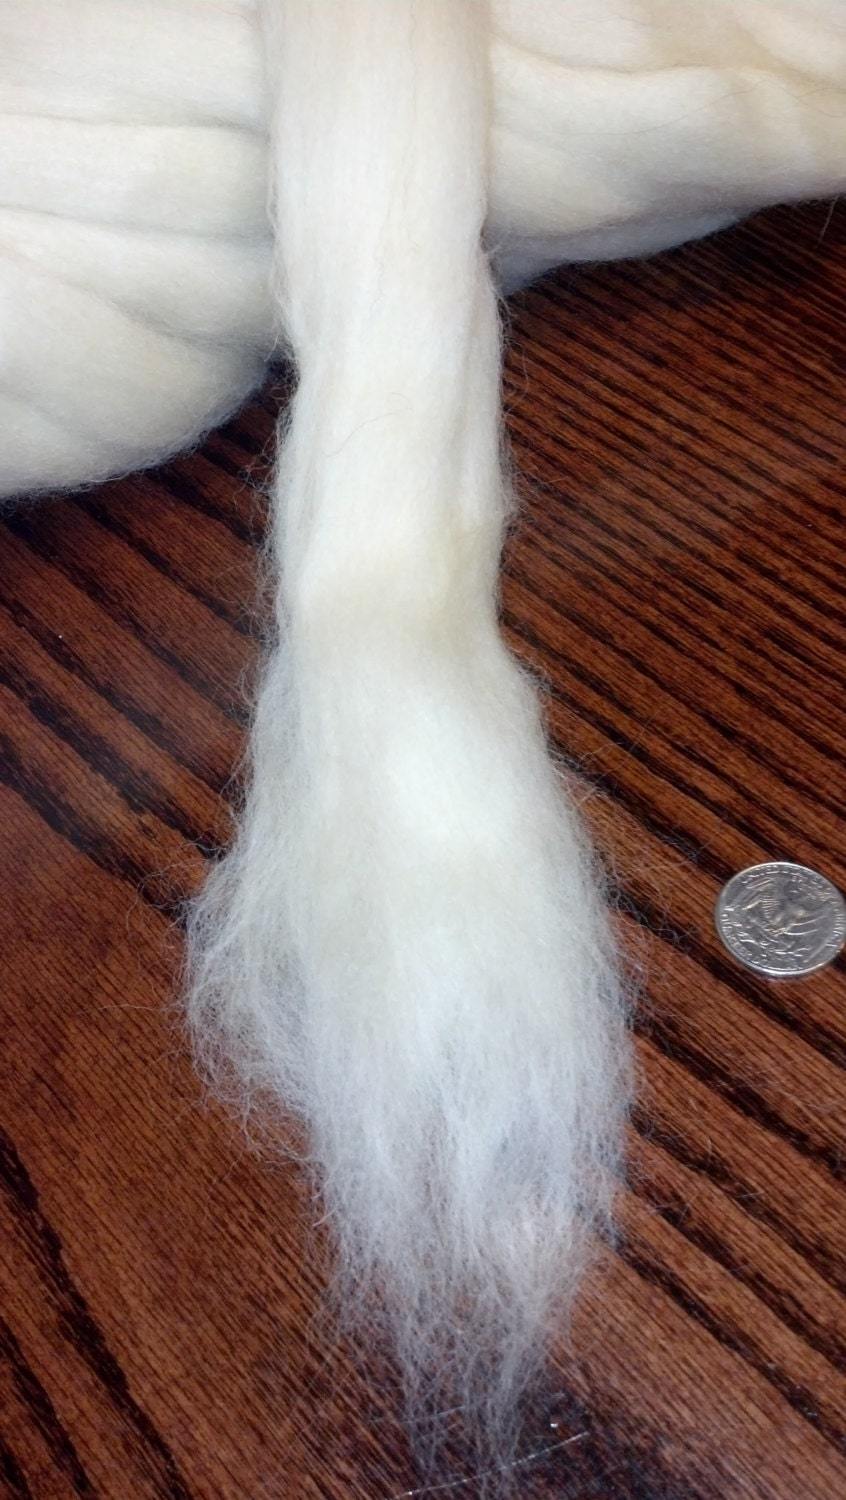 Natural White Wool Roving, Spin wool, Spin Fiber, White Wool Roving, Wool for felting, Wool Roving, Wool top, Wool for Spinning, FREE SHIP